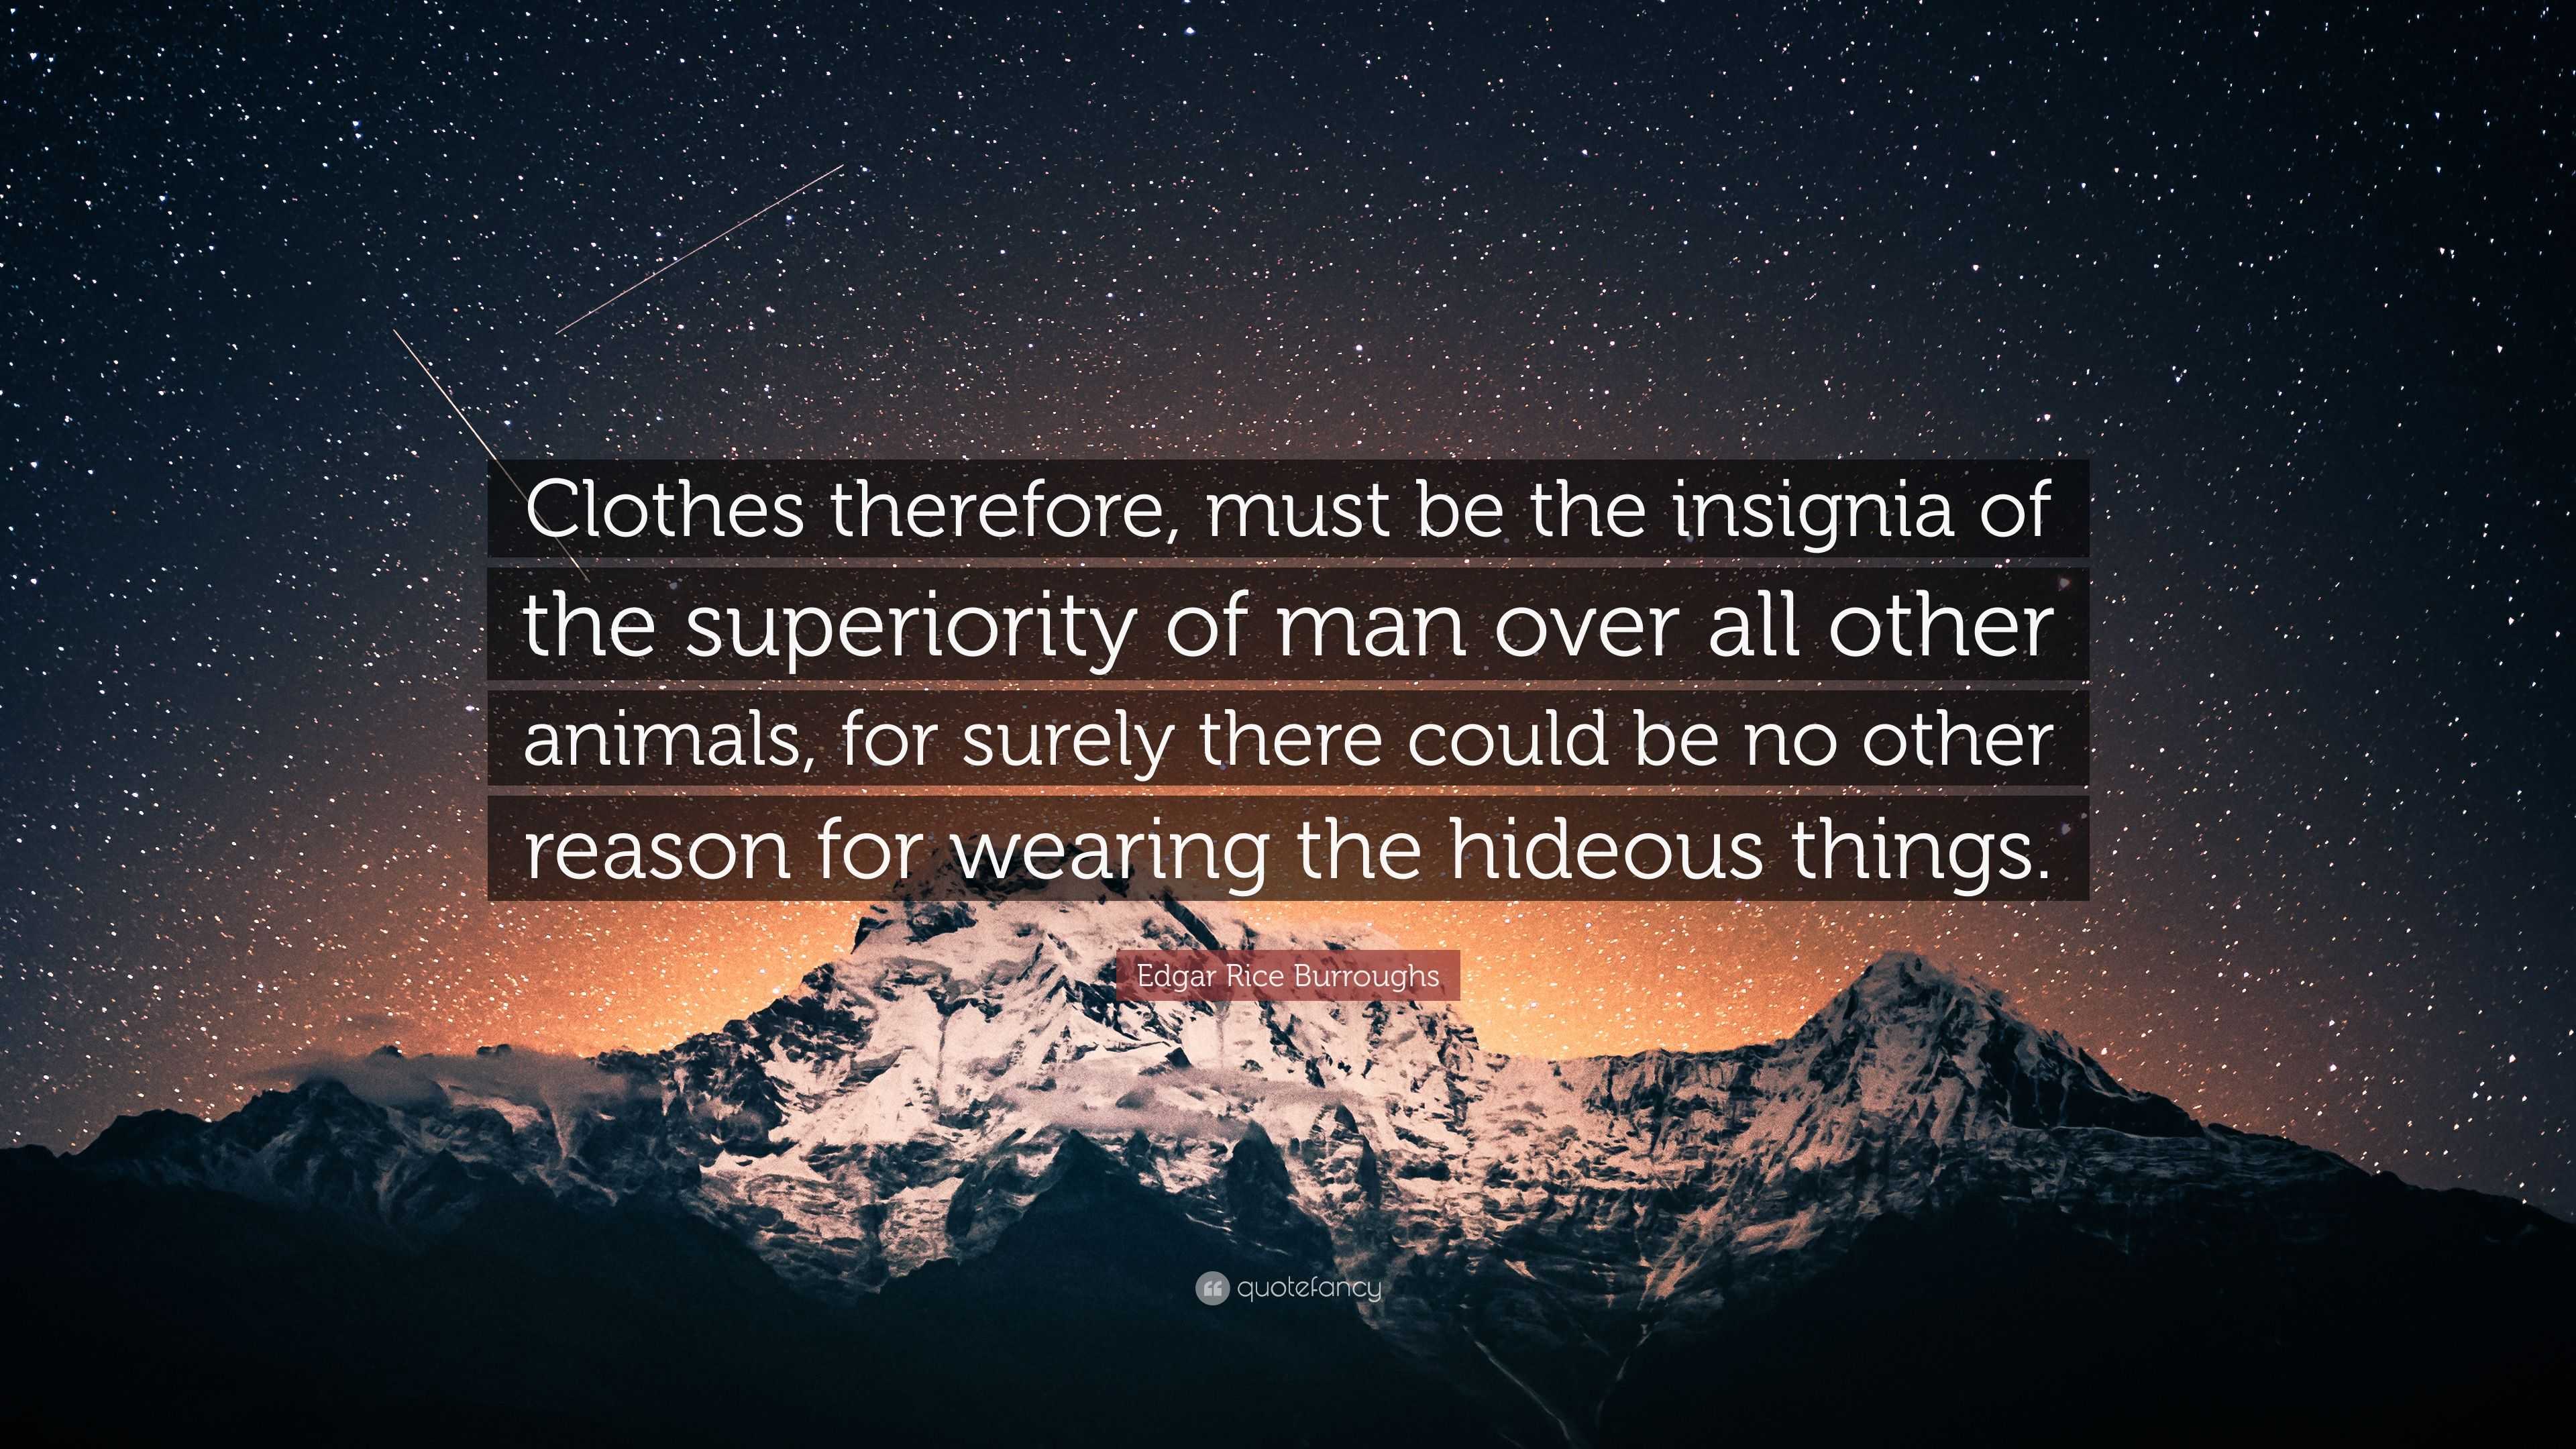 Edgar Rice Burroughs Quote: “Clothes therefore, must be the insignia of the  superiority of man over all other animals, for surely there could be no  o...”